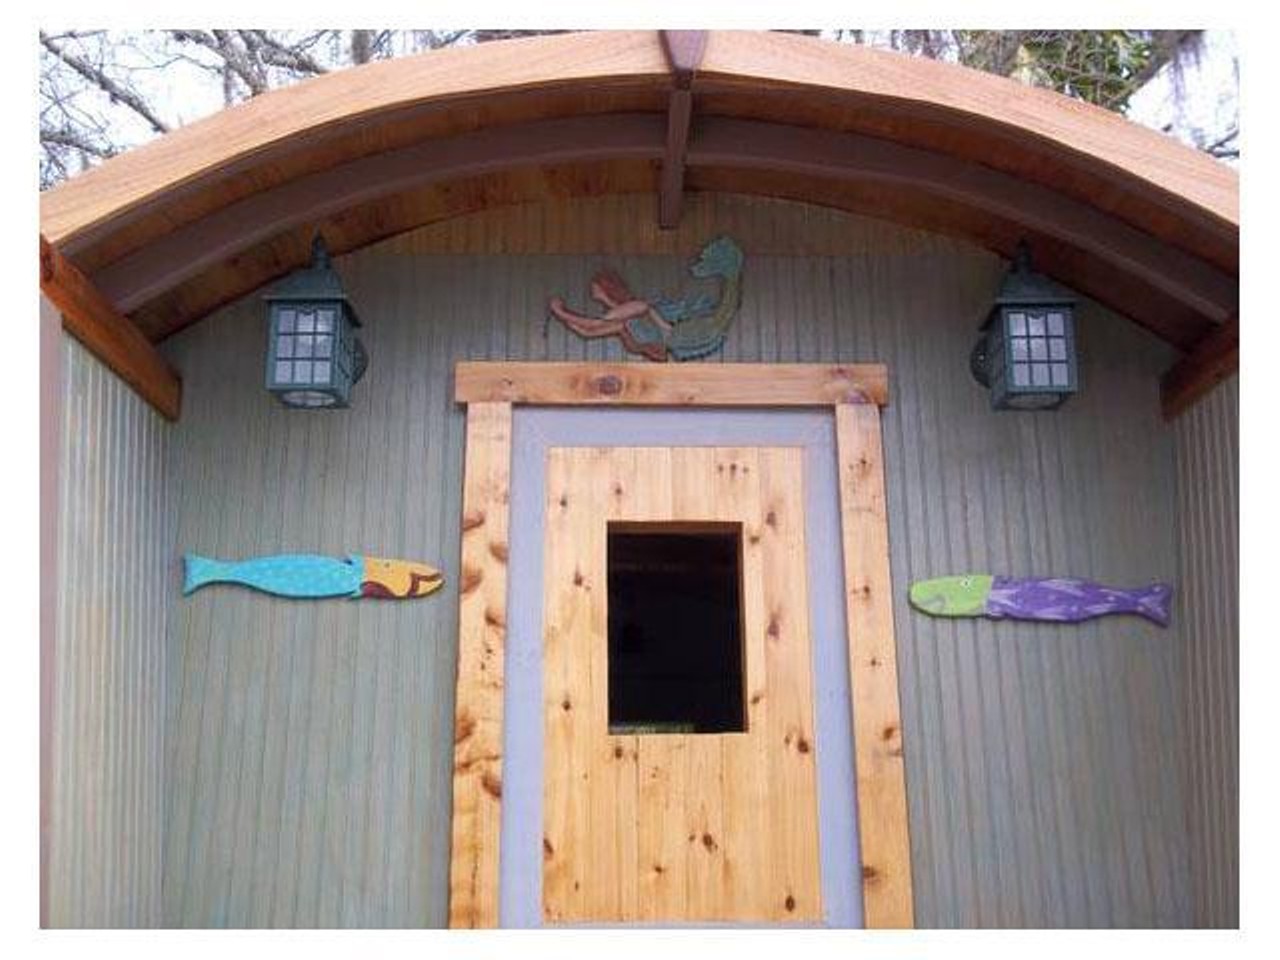 Ocean-themed Gypsy Wagon
Location: Englewood
Price: $8000
Size: 98 sq ft
It's like living in a gift shop!